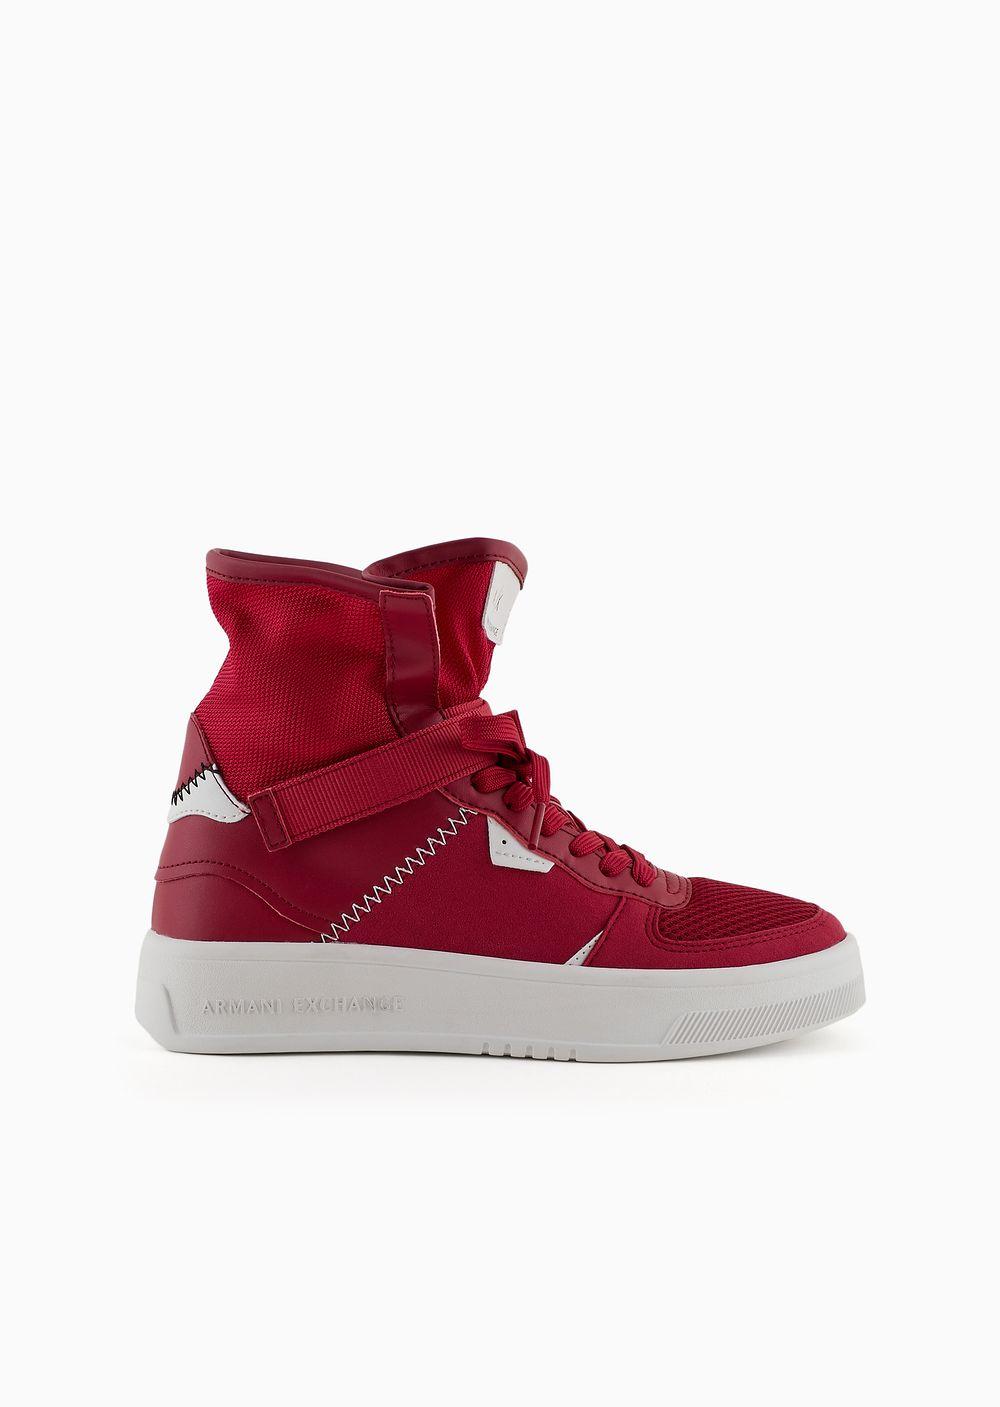 Armani Exchange Sneakers in Red | Lyst